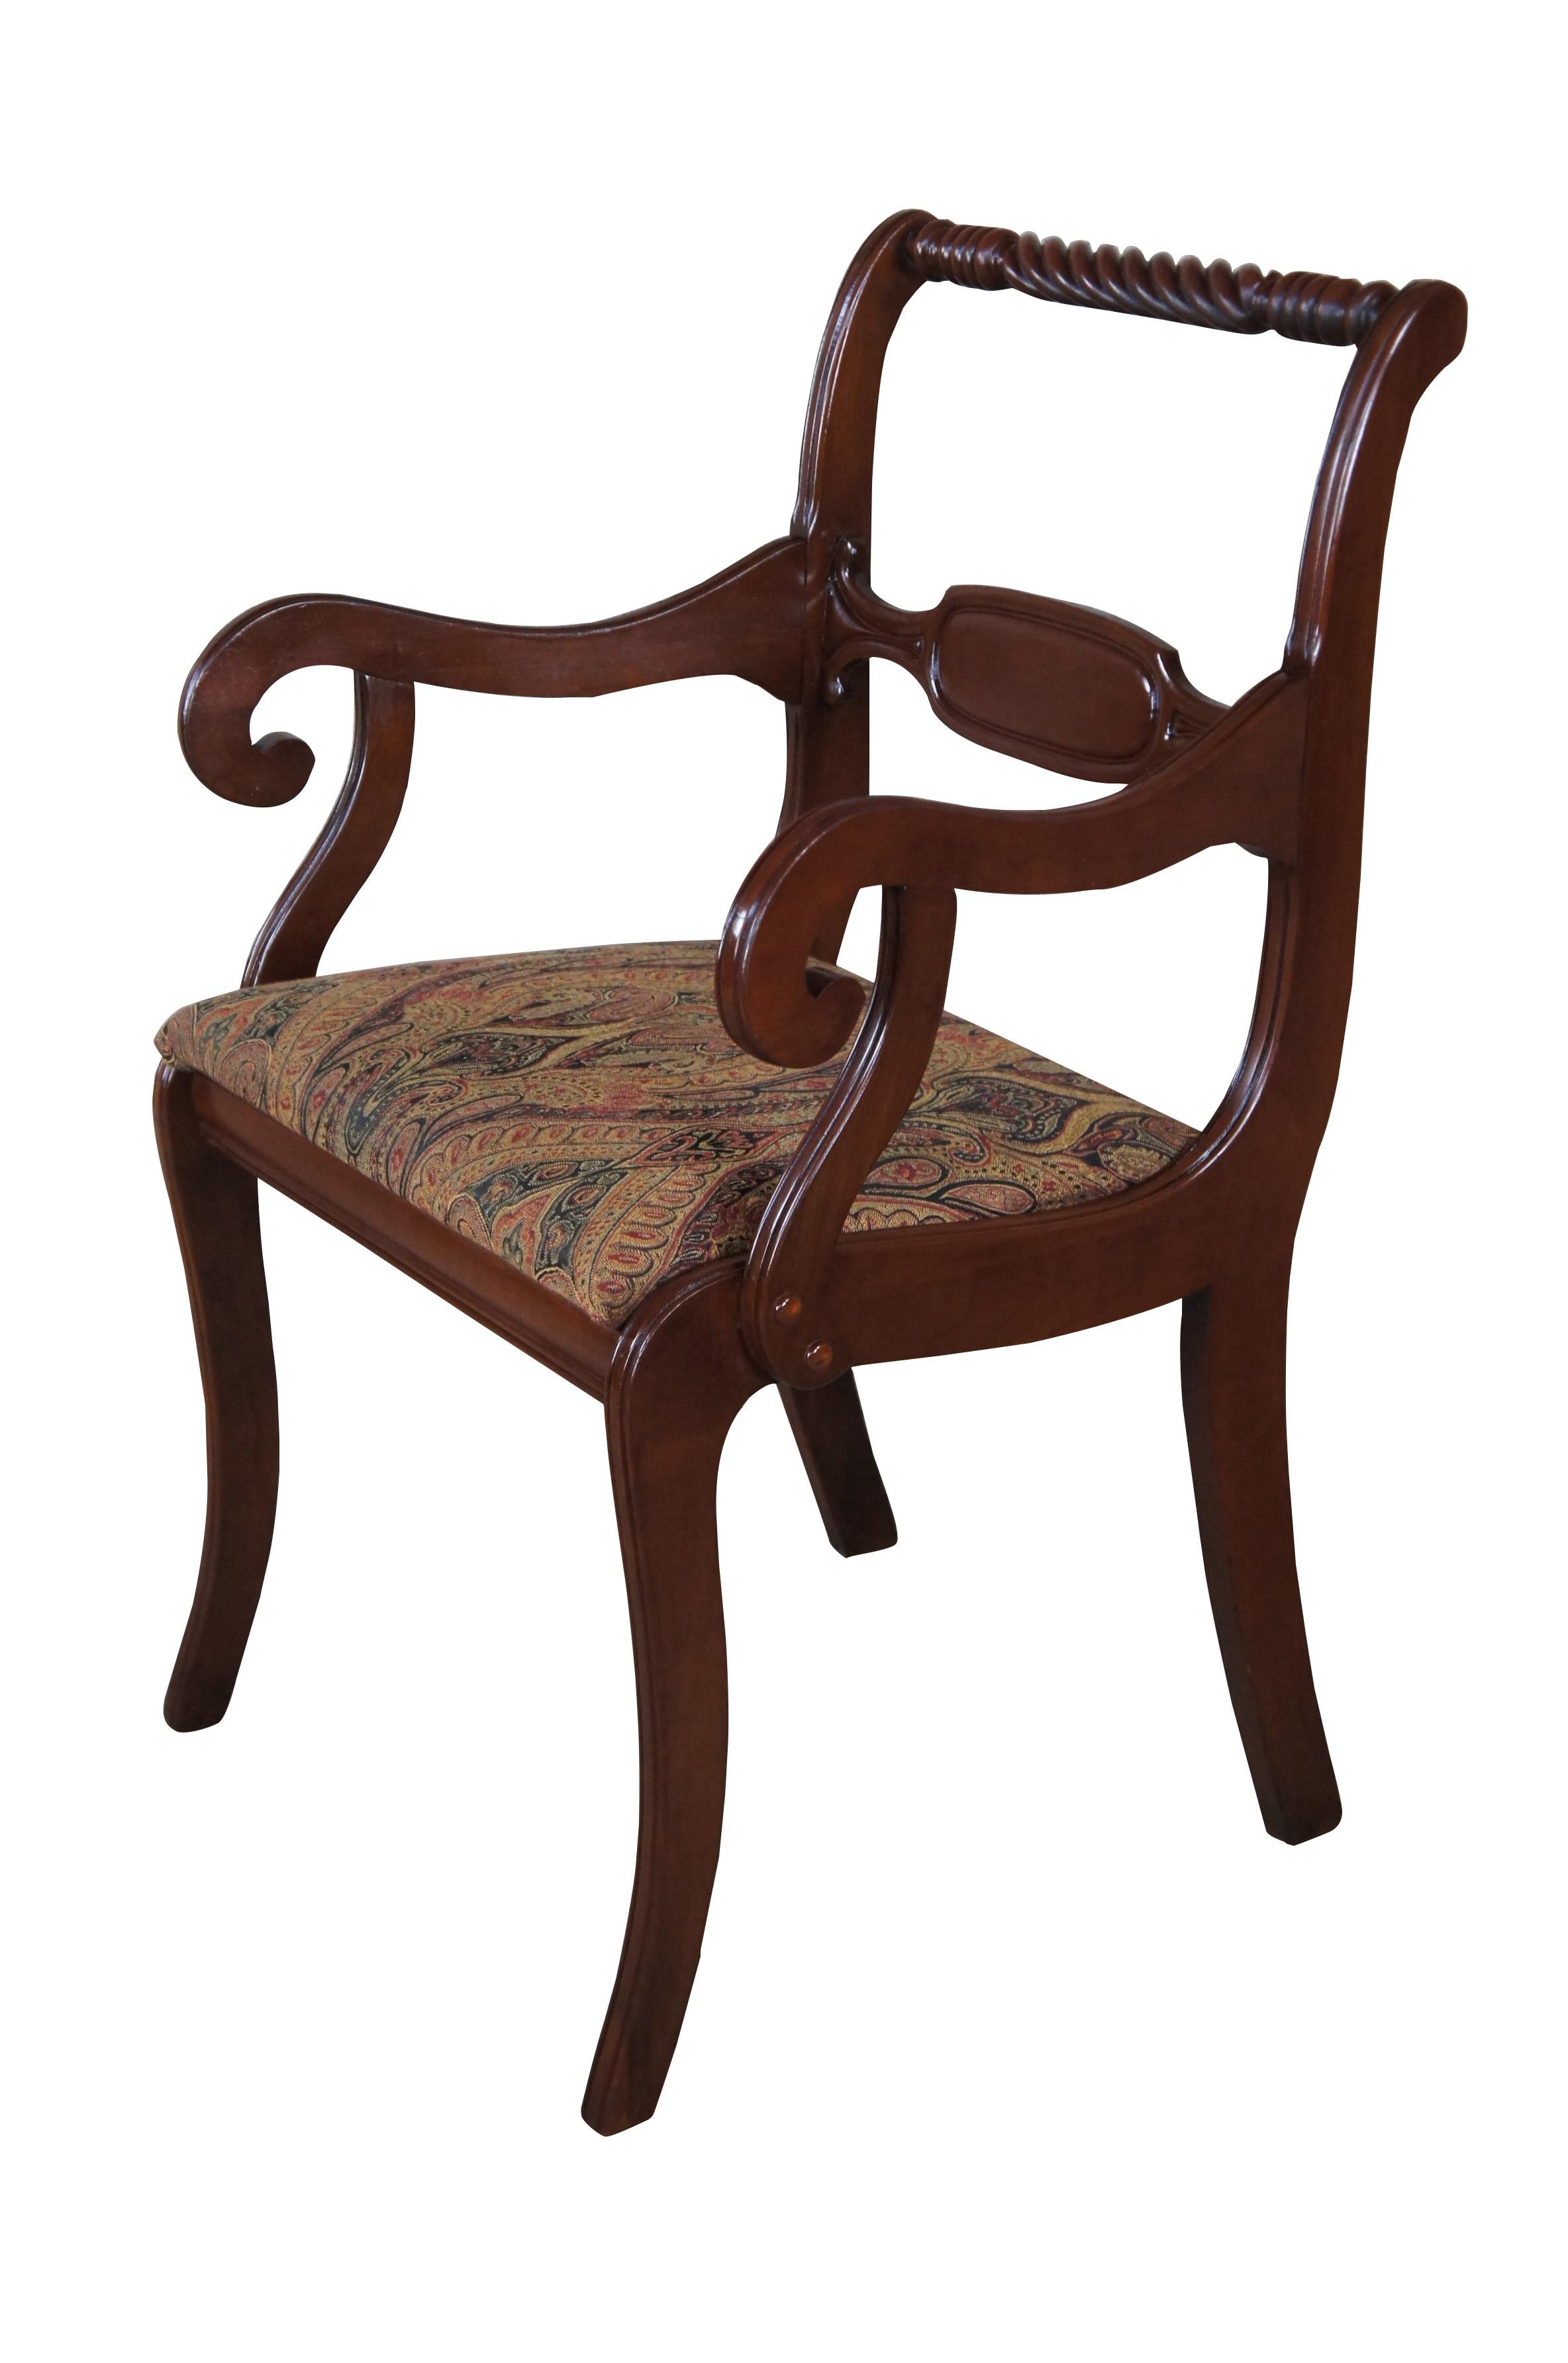 6 Antique Styled By Park English Regency American Cherry Paisley Dining Chairs  In Good Condition For Sale In Dayton, OH